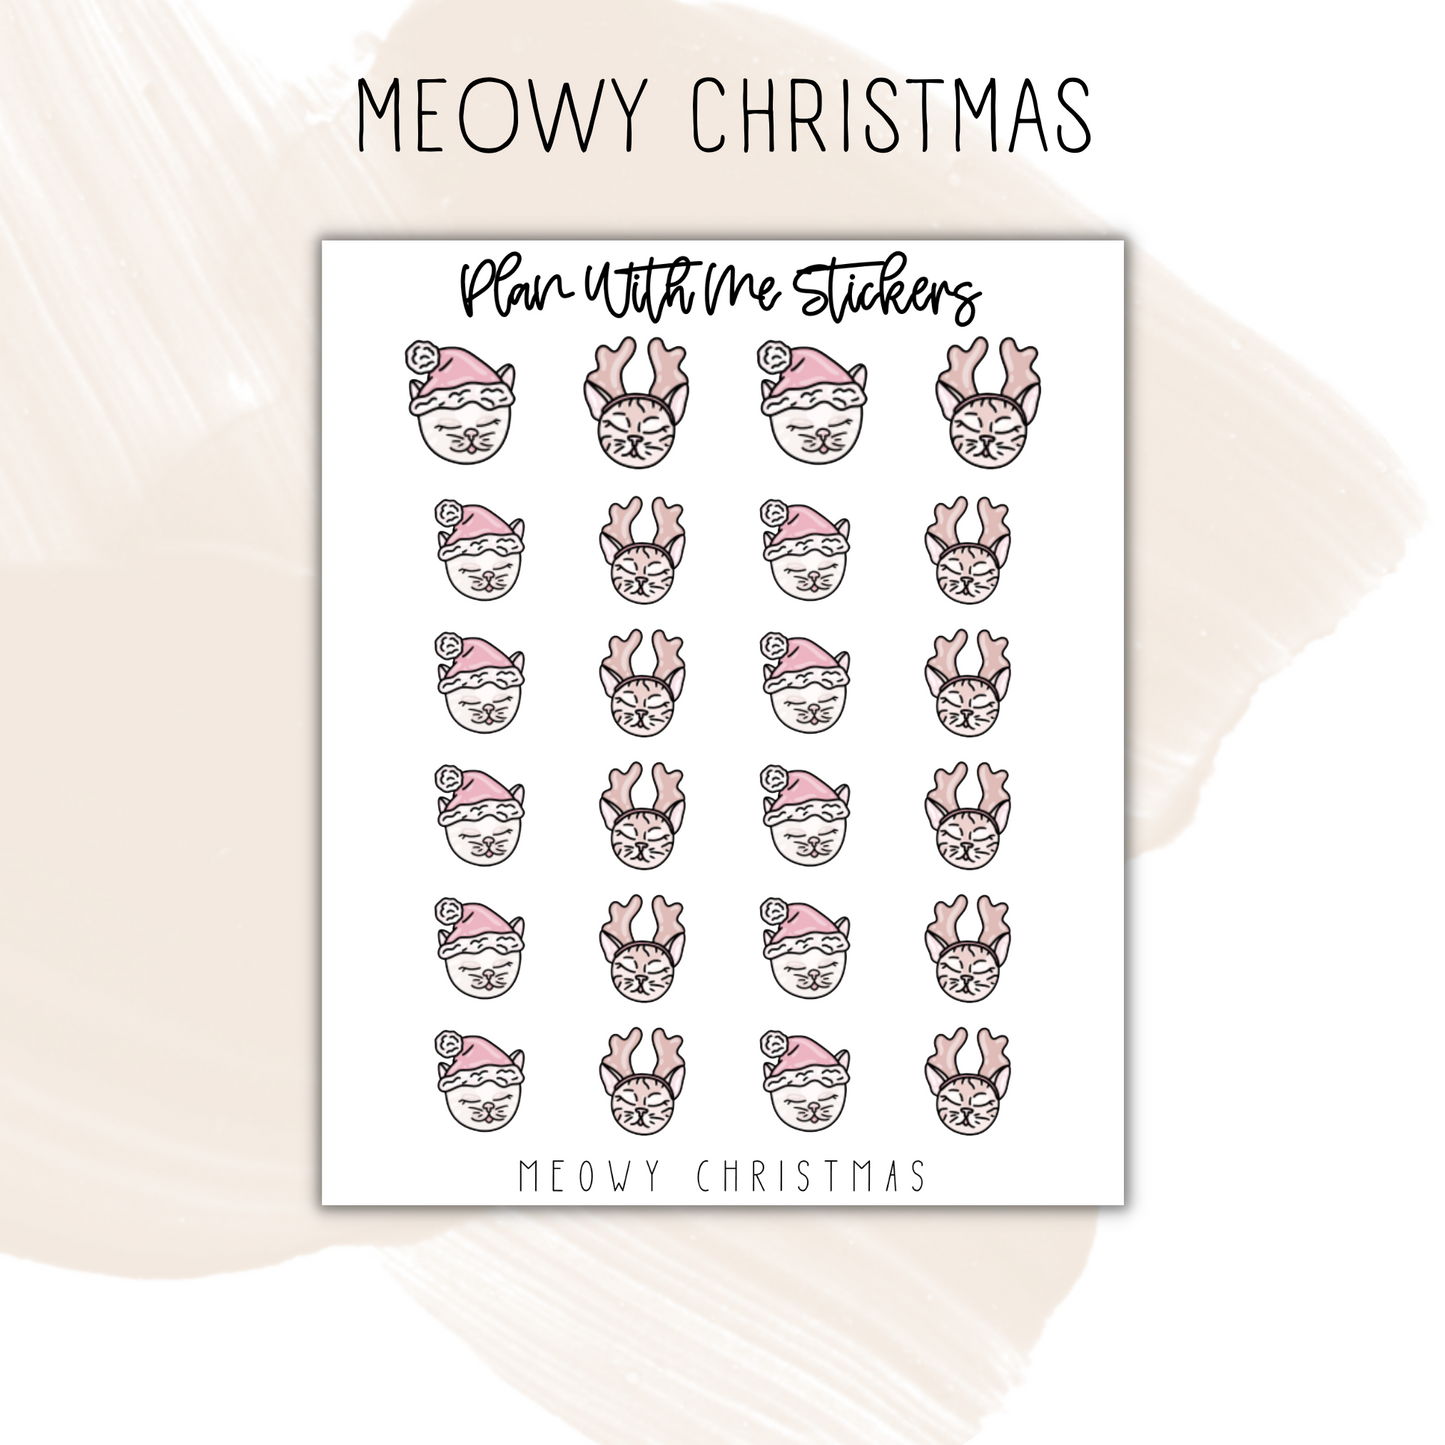 Meowy Christmas | Doodles